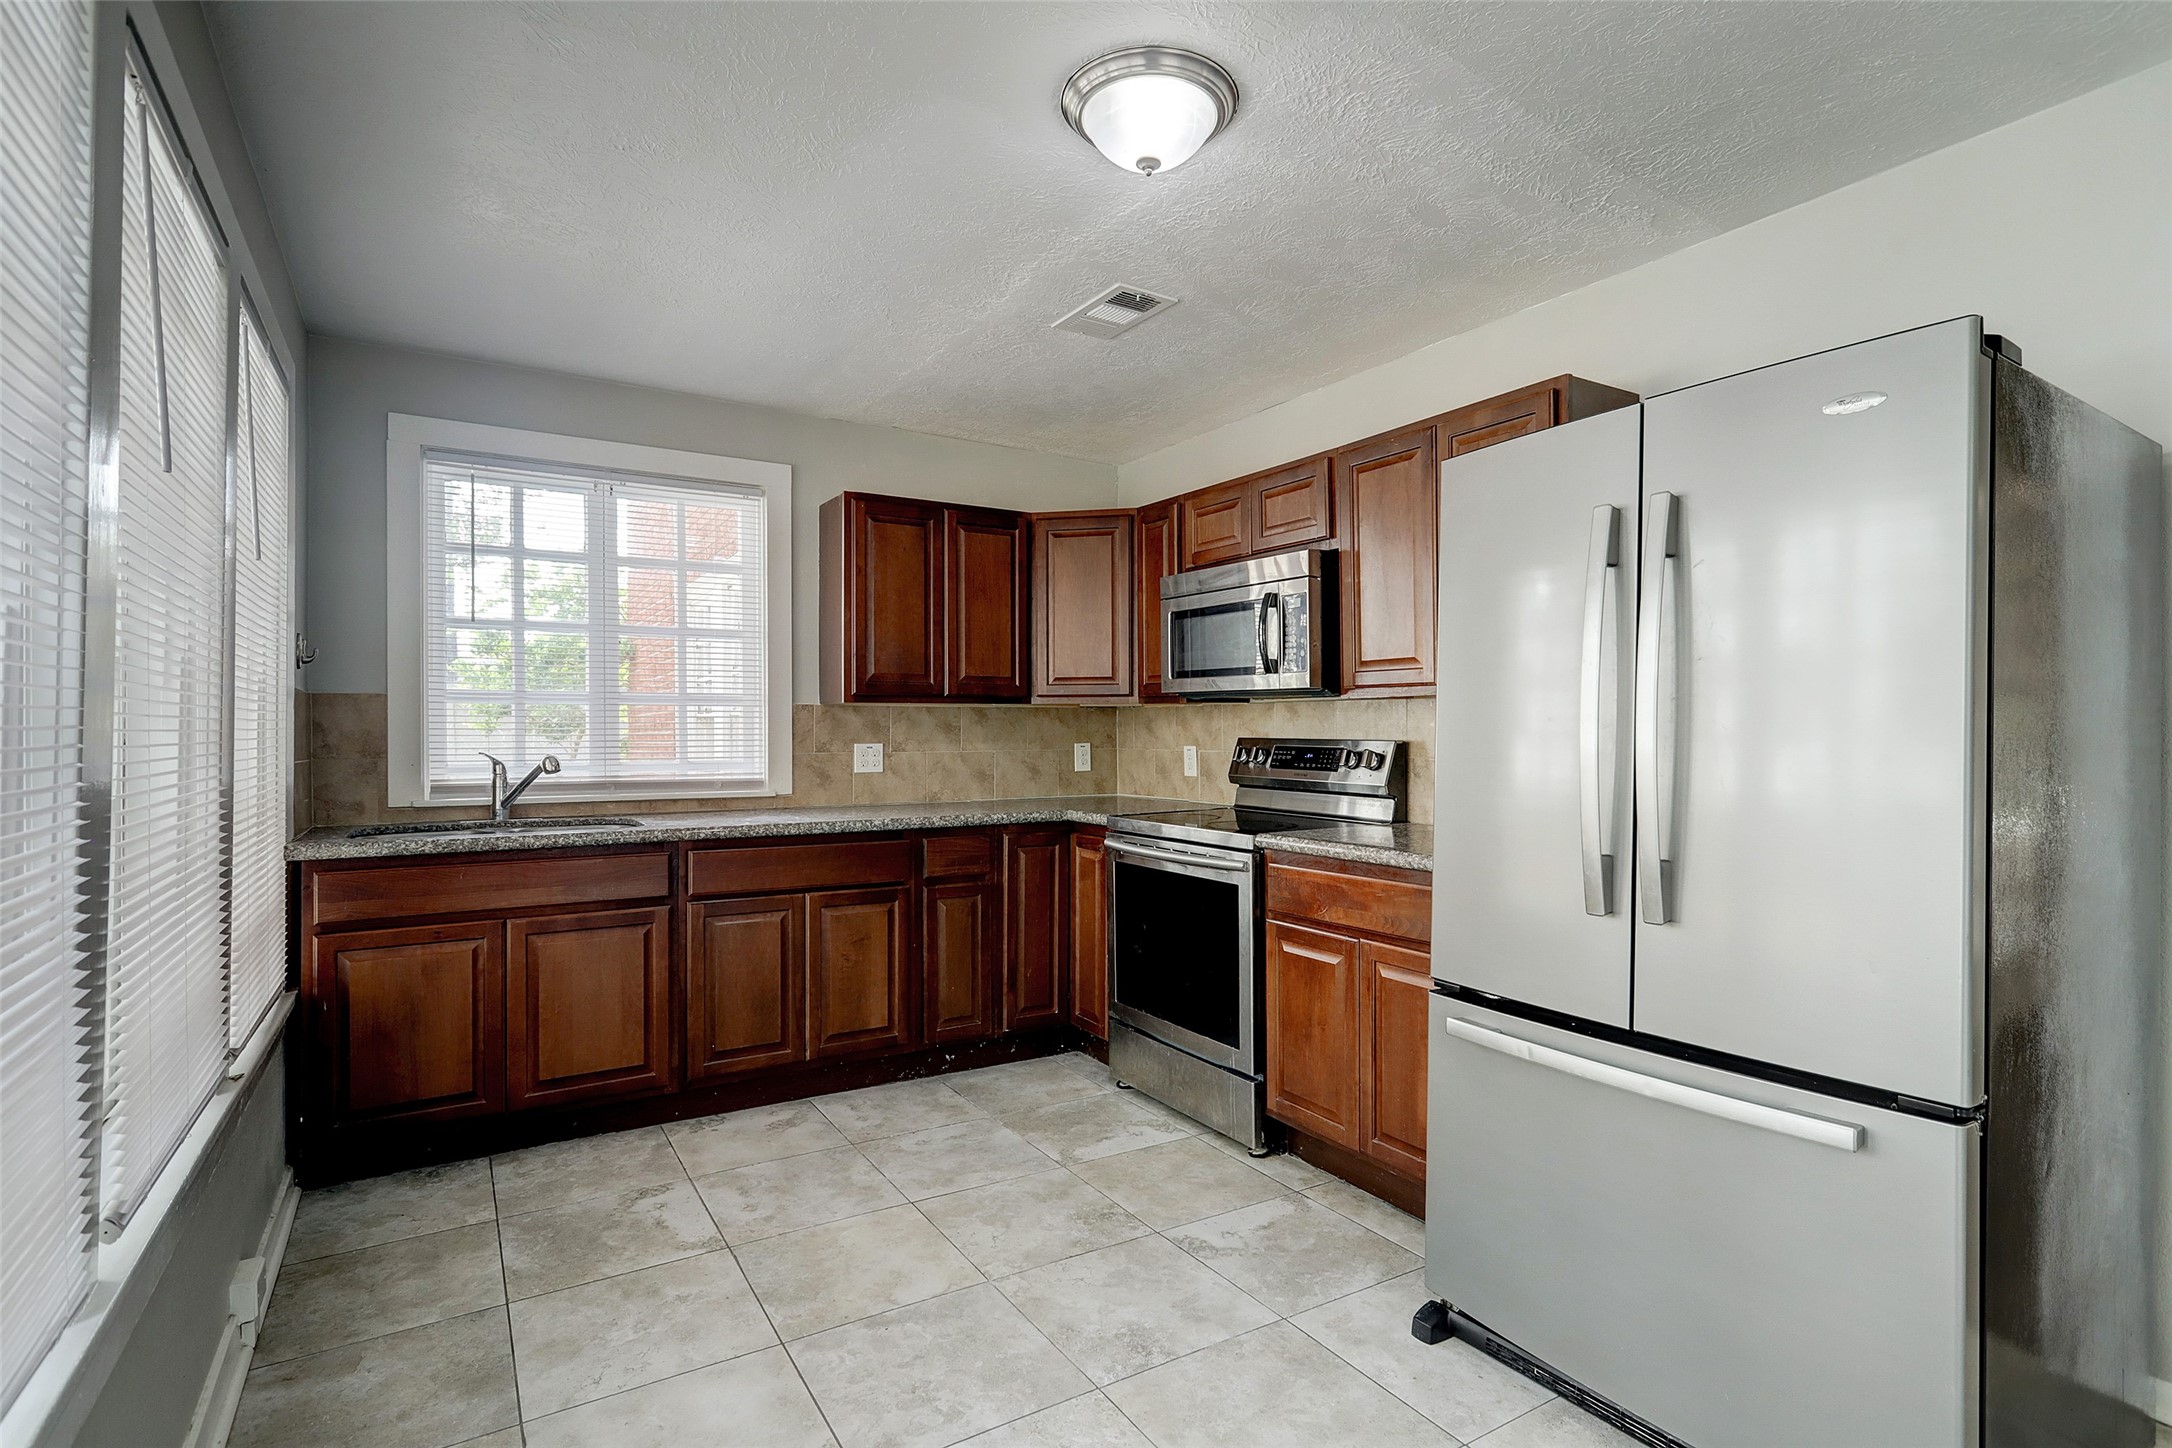 The kitchen features stainless steel appliances and looks out onto the backyard area and front porch. The walls are lined with windows for plenty of natural light.